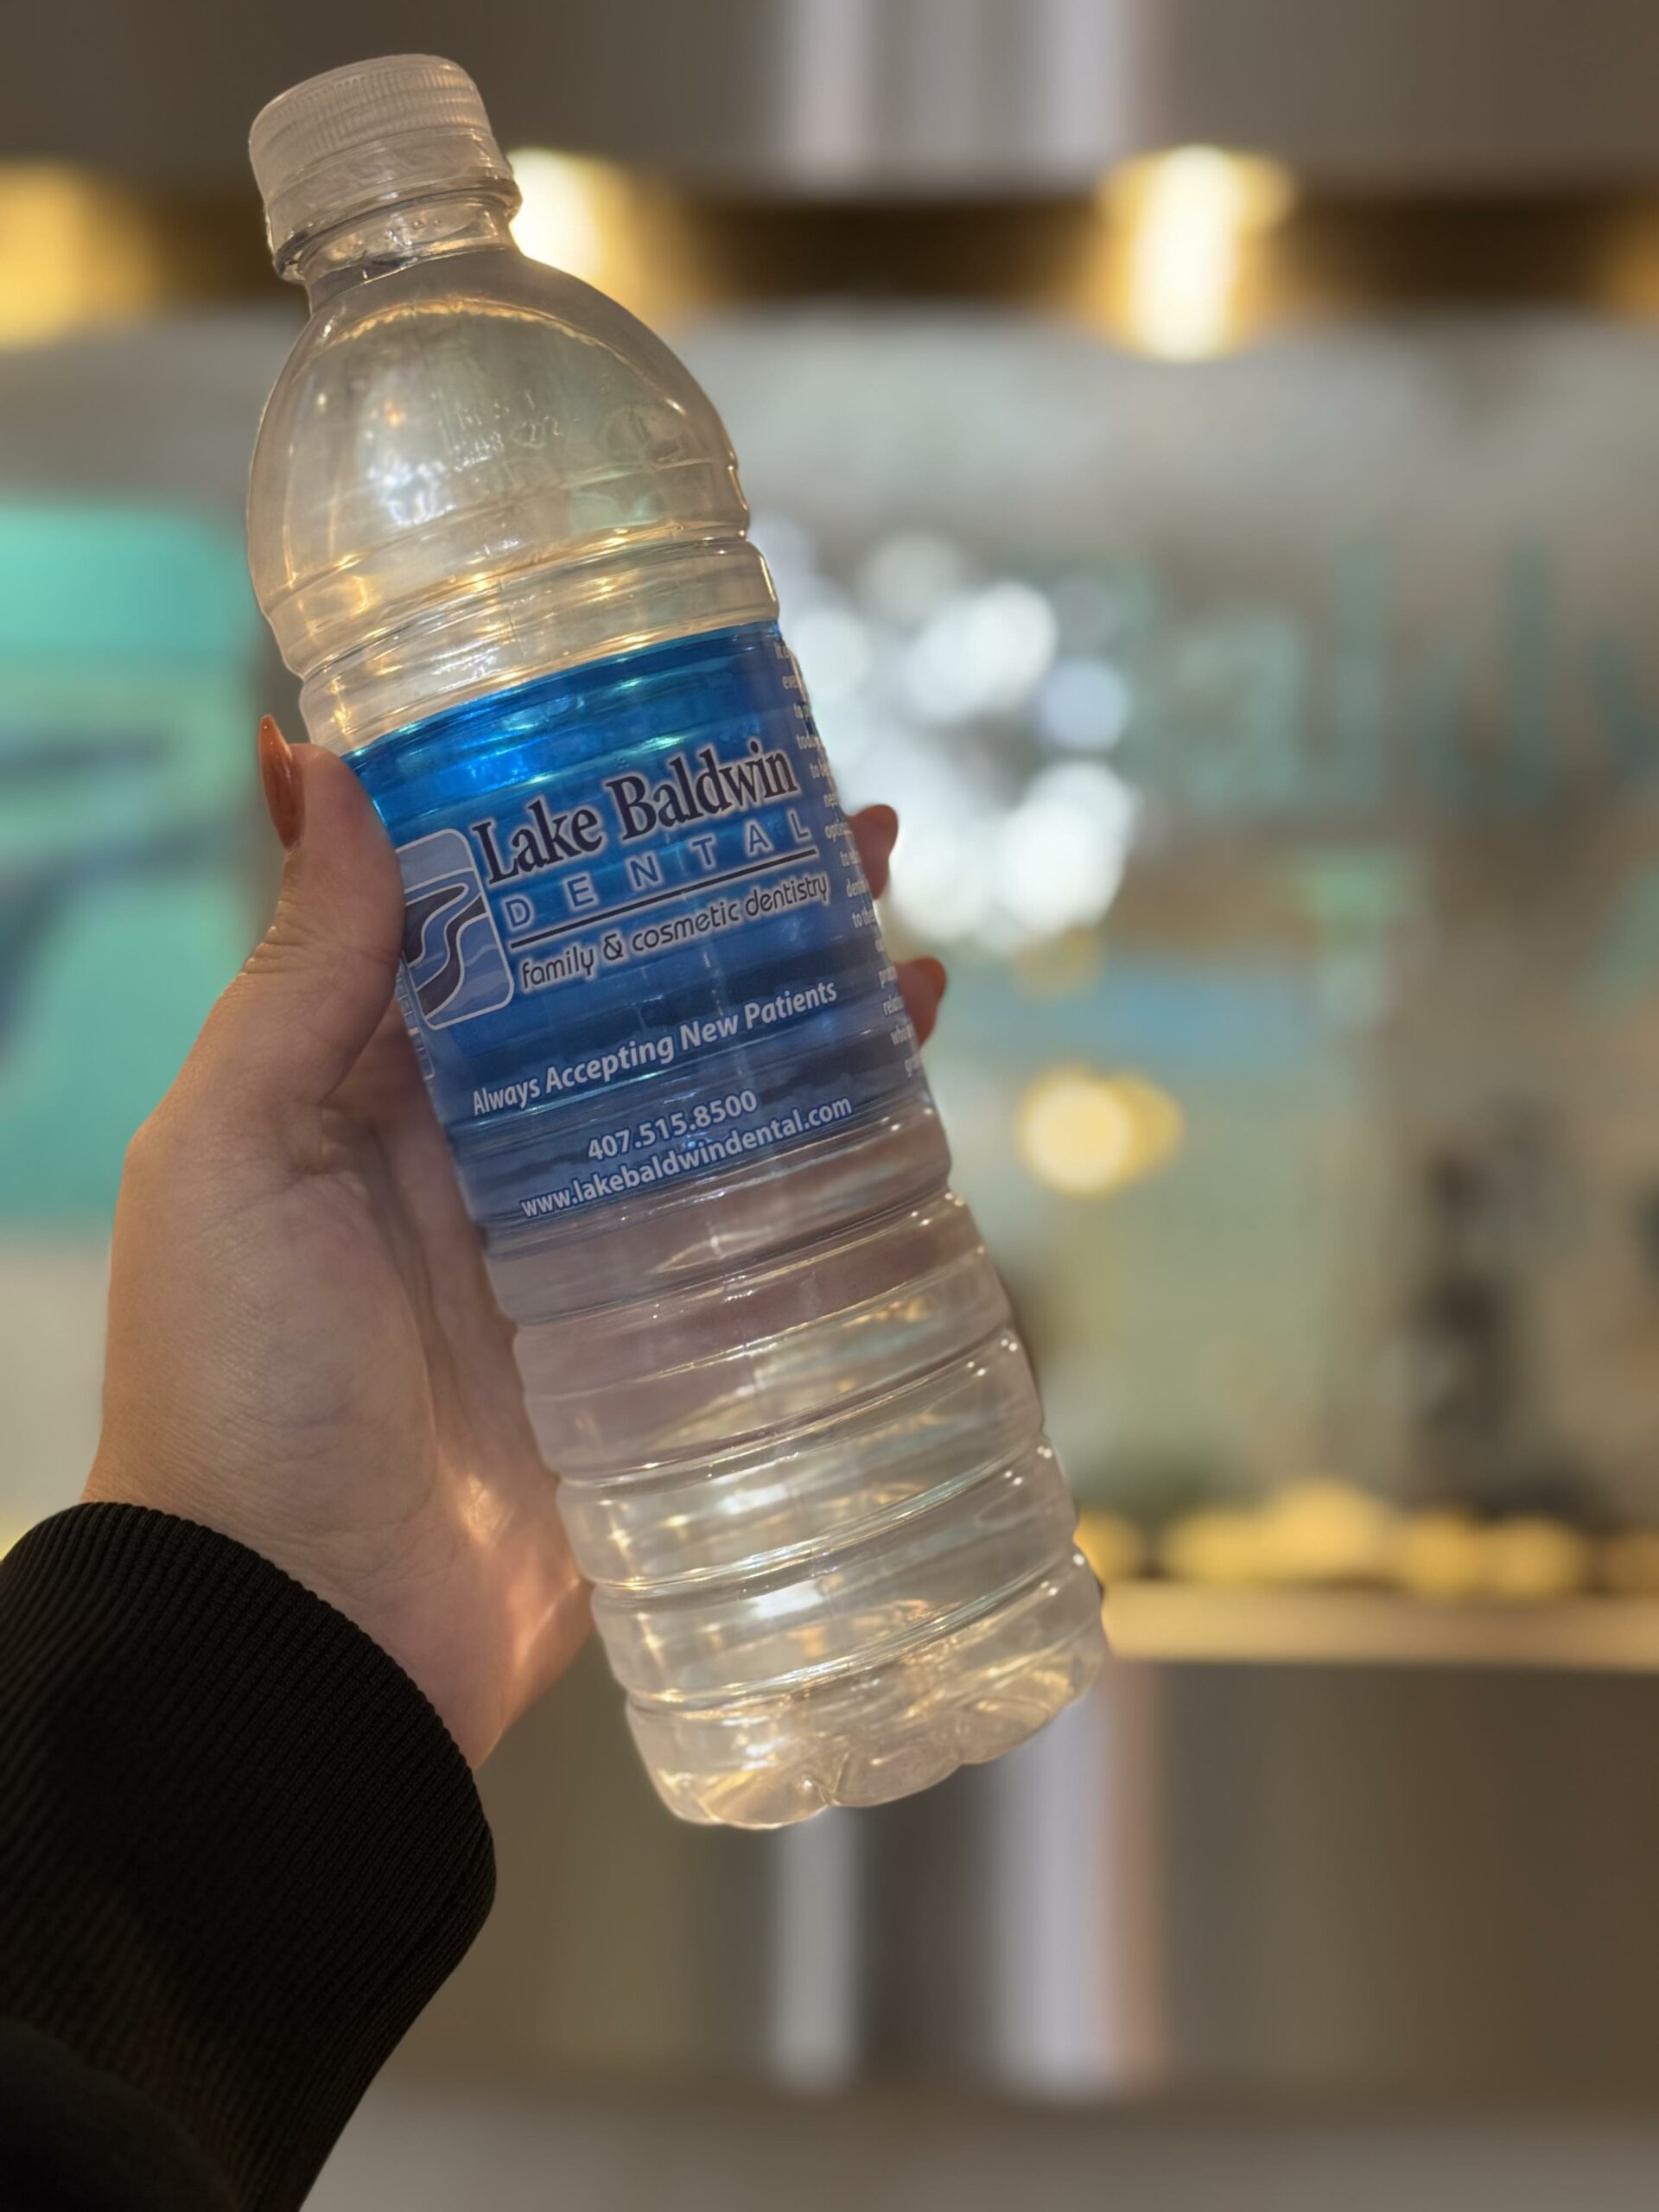 And grab a bottle of water in our lobby at your next visit!